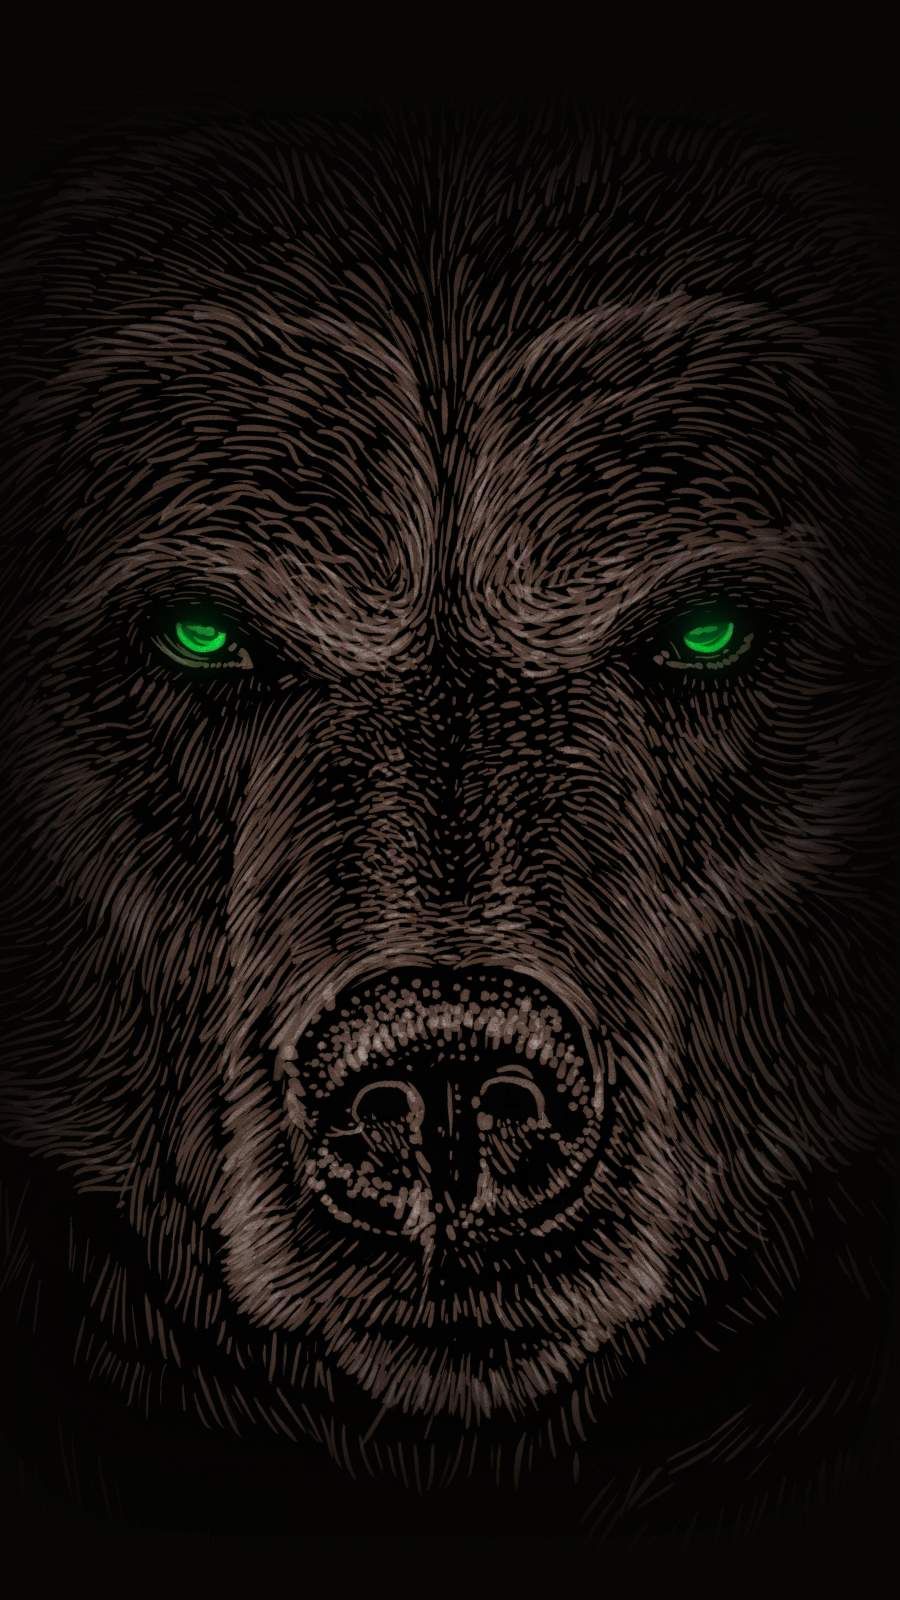 Grizzly Bear iPhone Wallpaper Grizzly bear tattoos Bear artwork